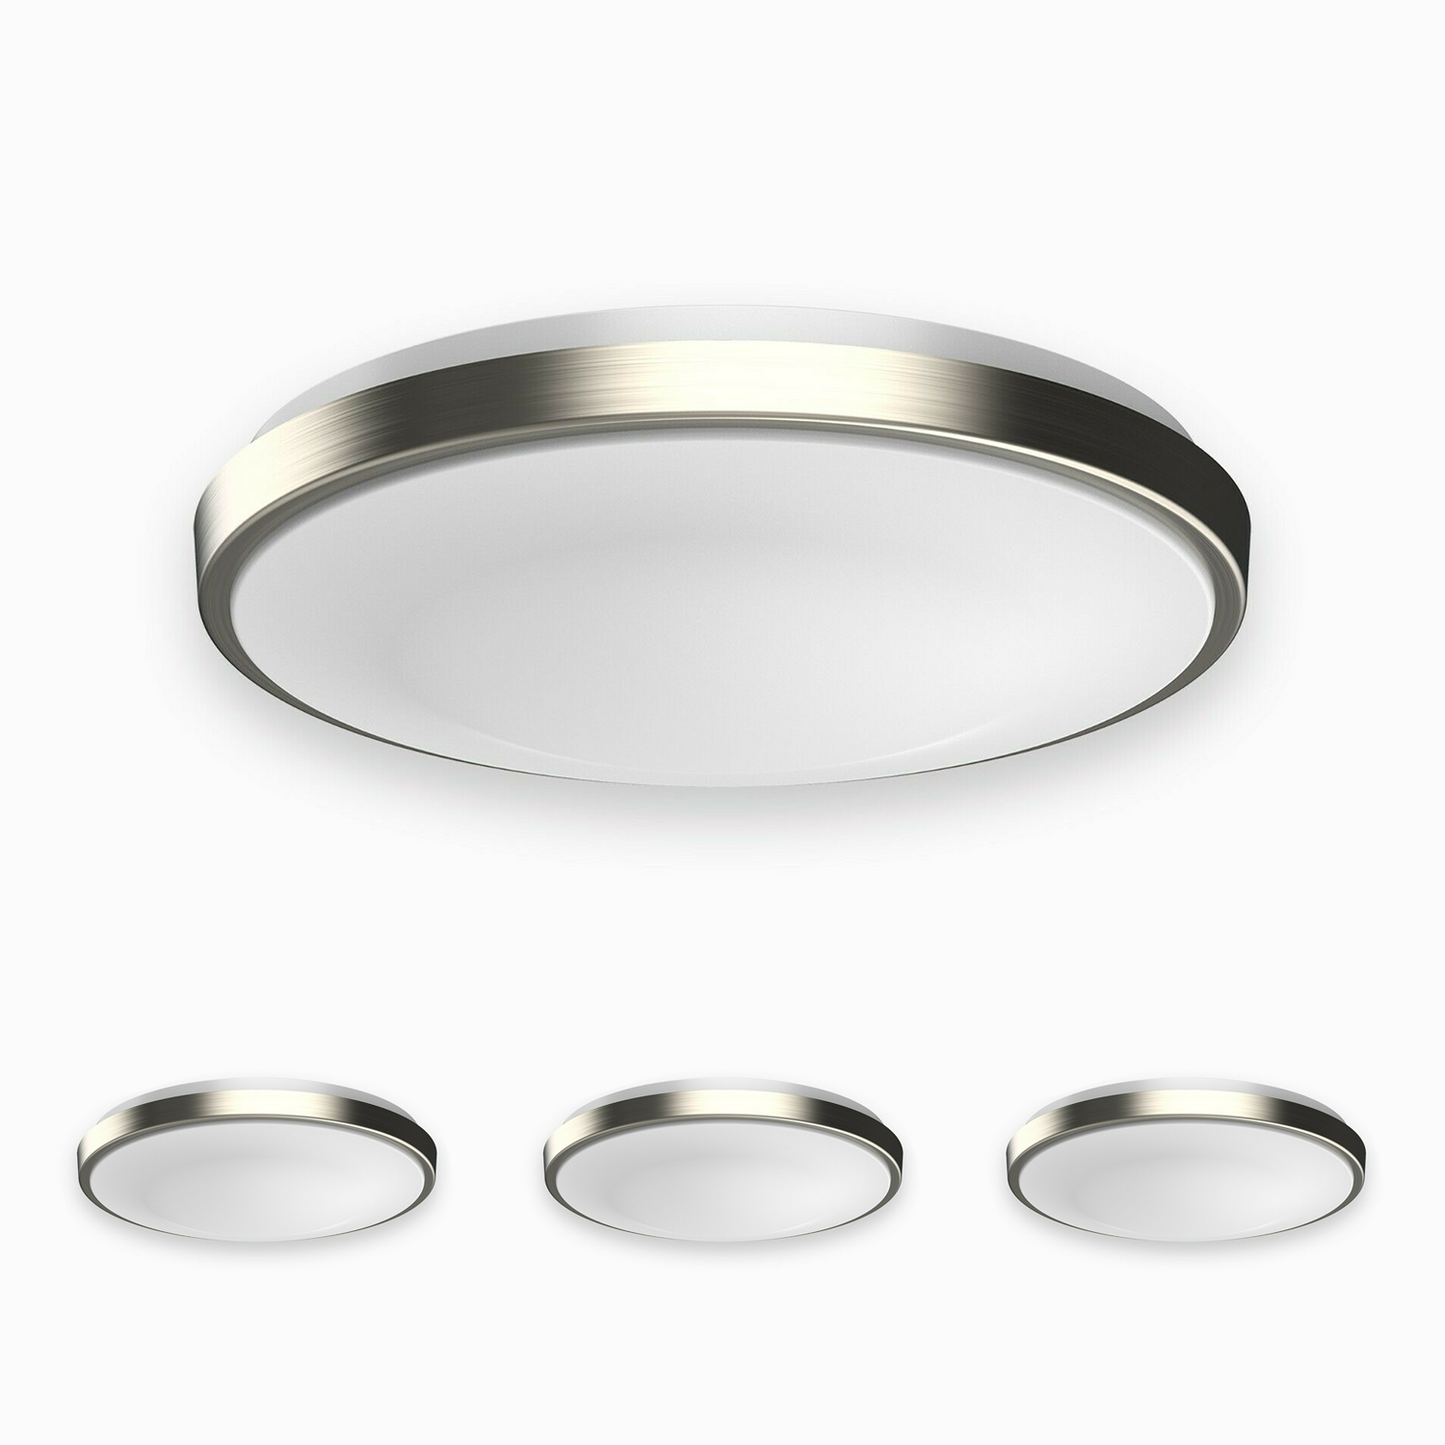 14 in. Round Brushed Nickel Dimmable Flush Mount Ceiling Light, Single Ring - 1750 Lumens - Power - 25W - 3 Color Switchable (3000K/4000K/5000K)